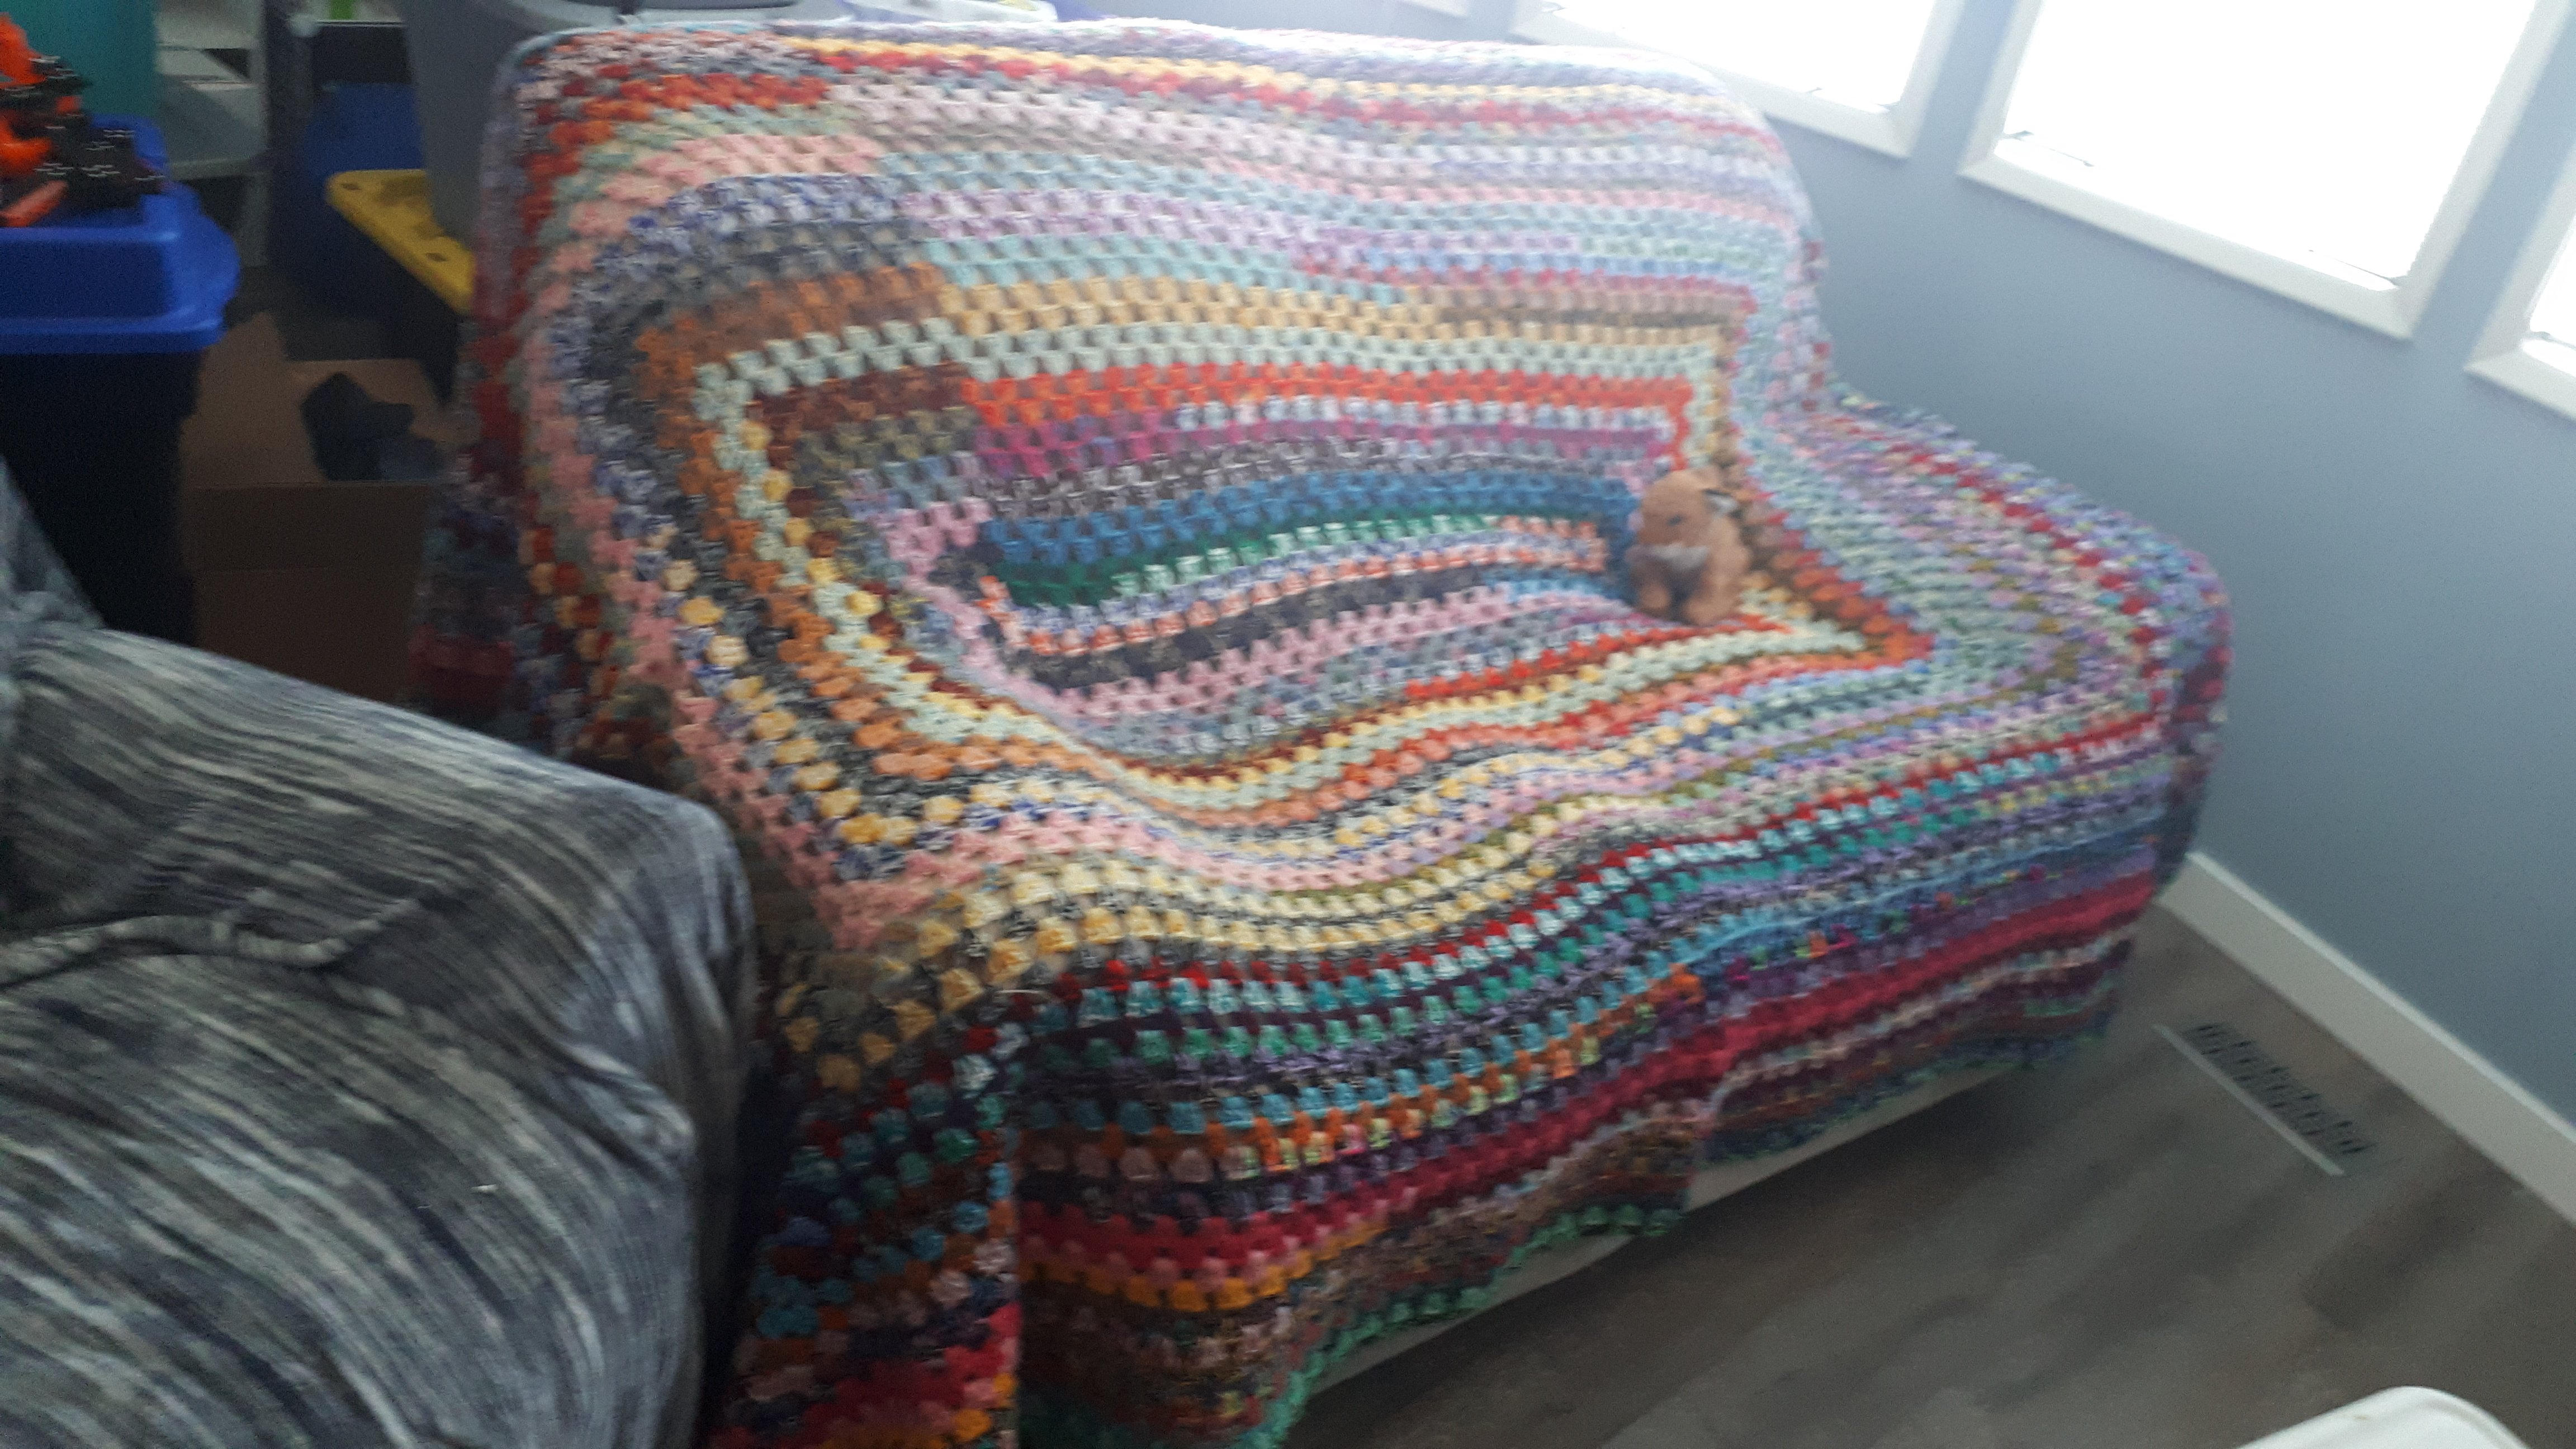 A granny rectangle blanket for the couch. 2 strand acrylic yarn randomly paired by Karen Richardson.